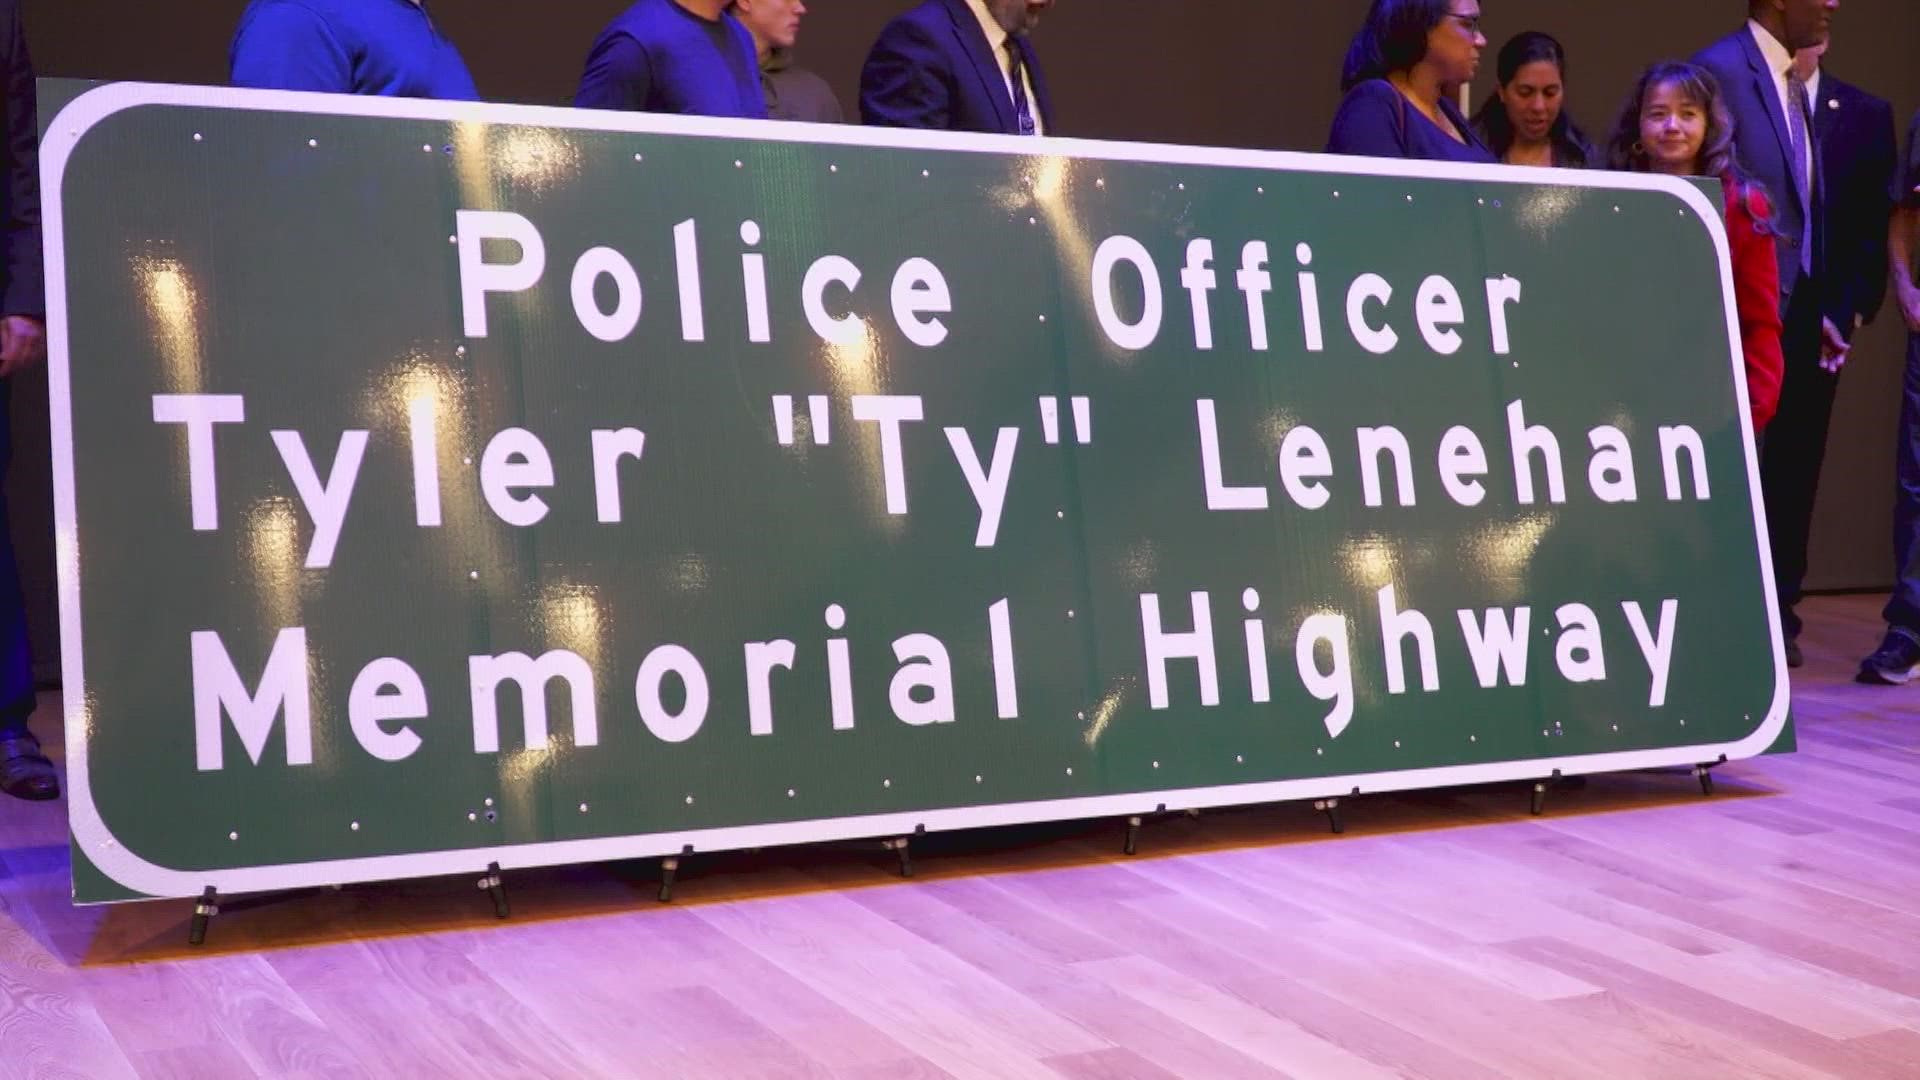 The sign will cover the memorial dedication on Highway 99 in both directions between Sheldon Road and Grant Line Road.